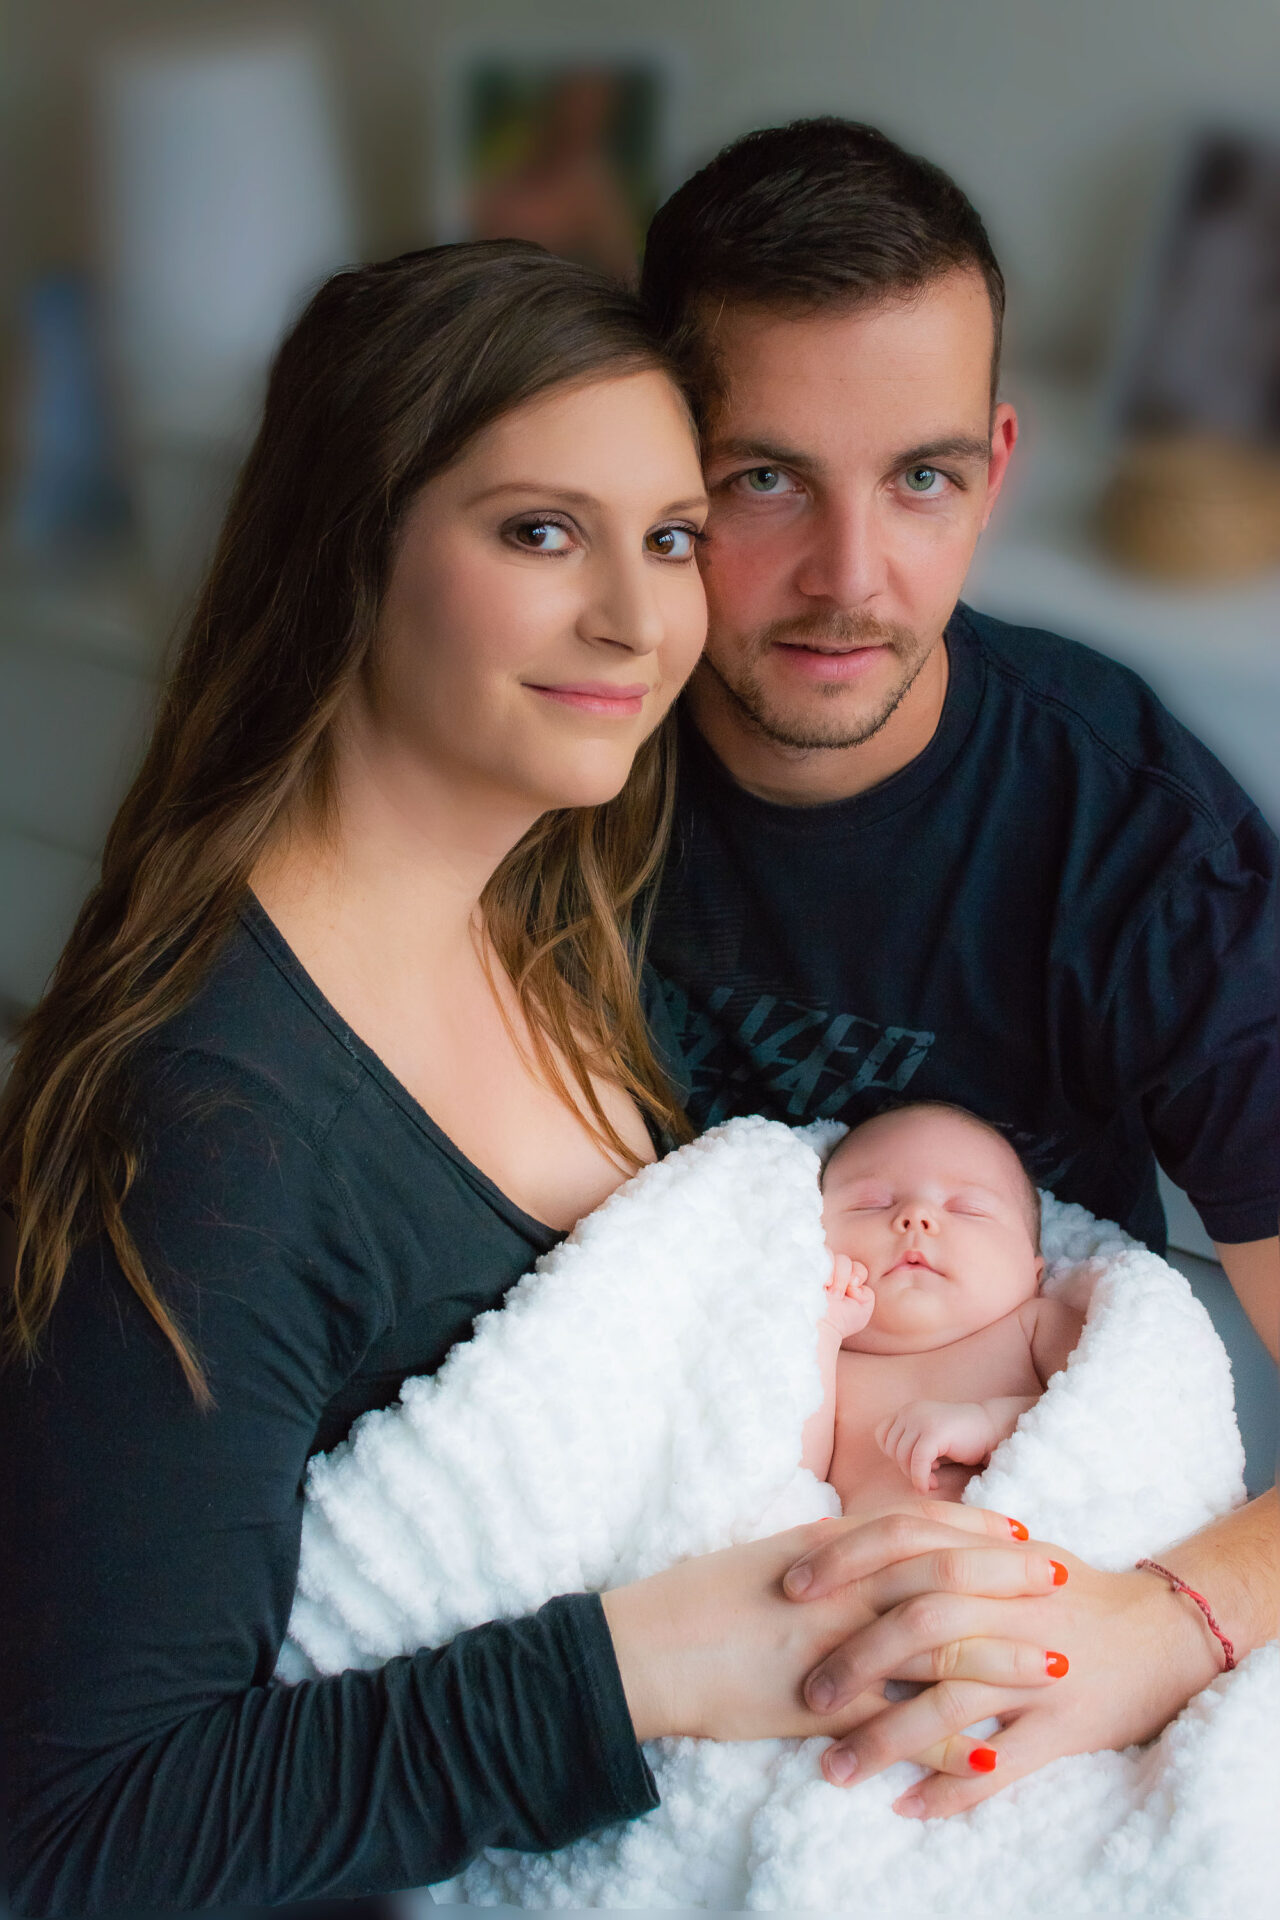 newborn photography in kings hill kent